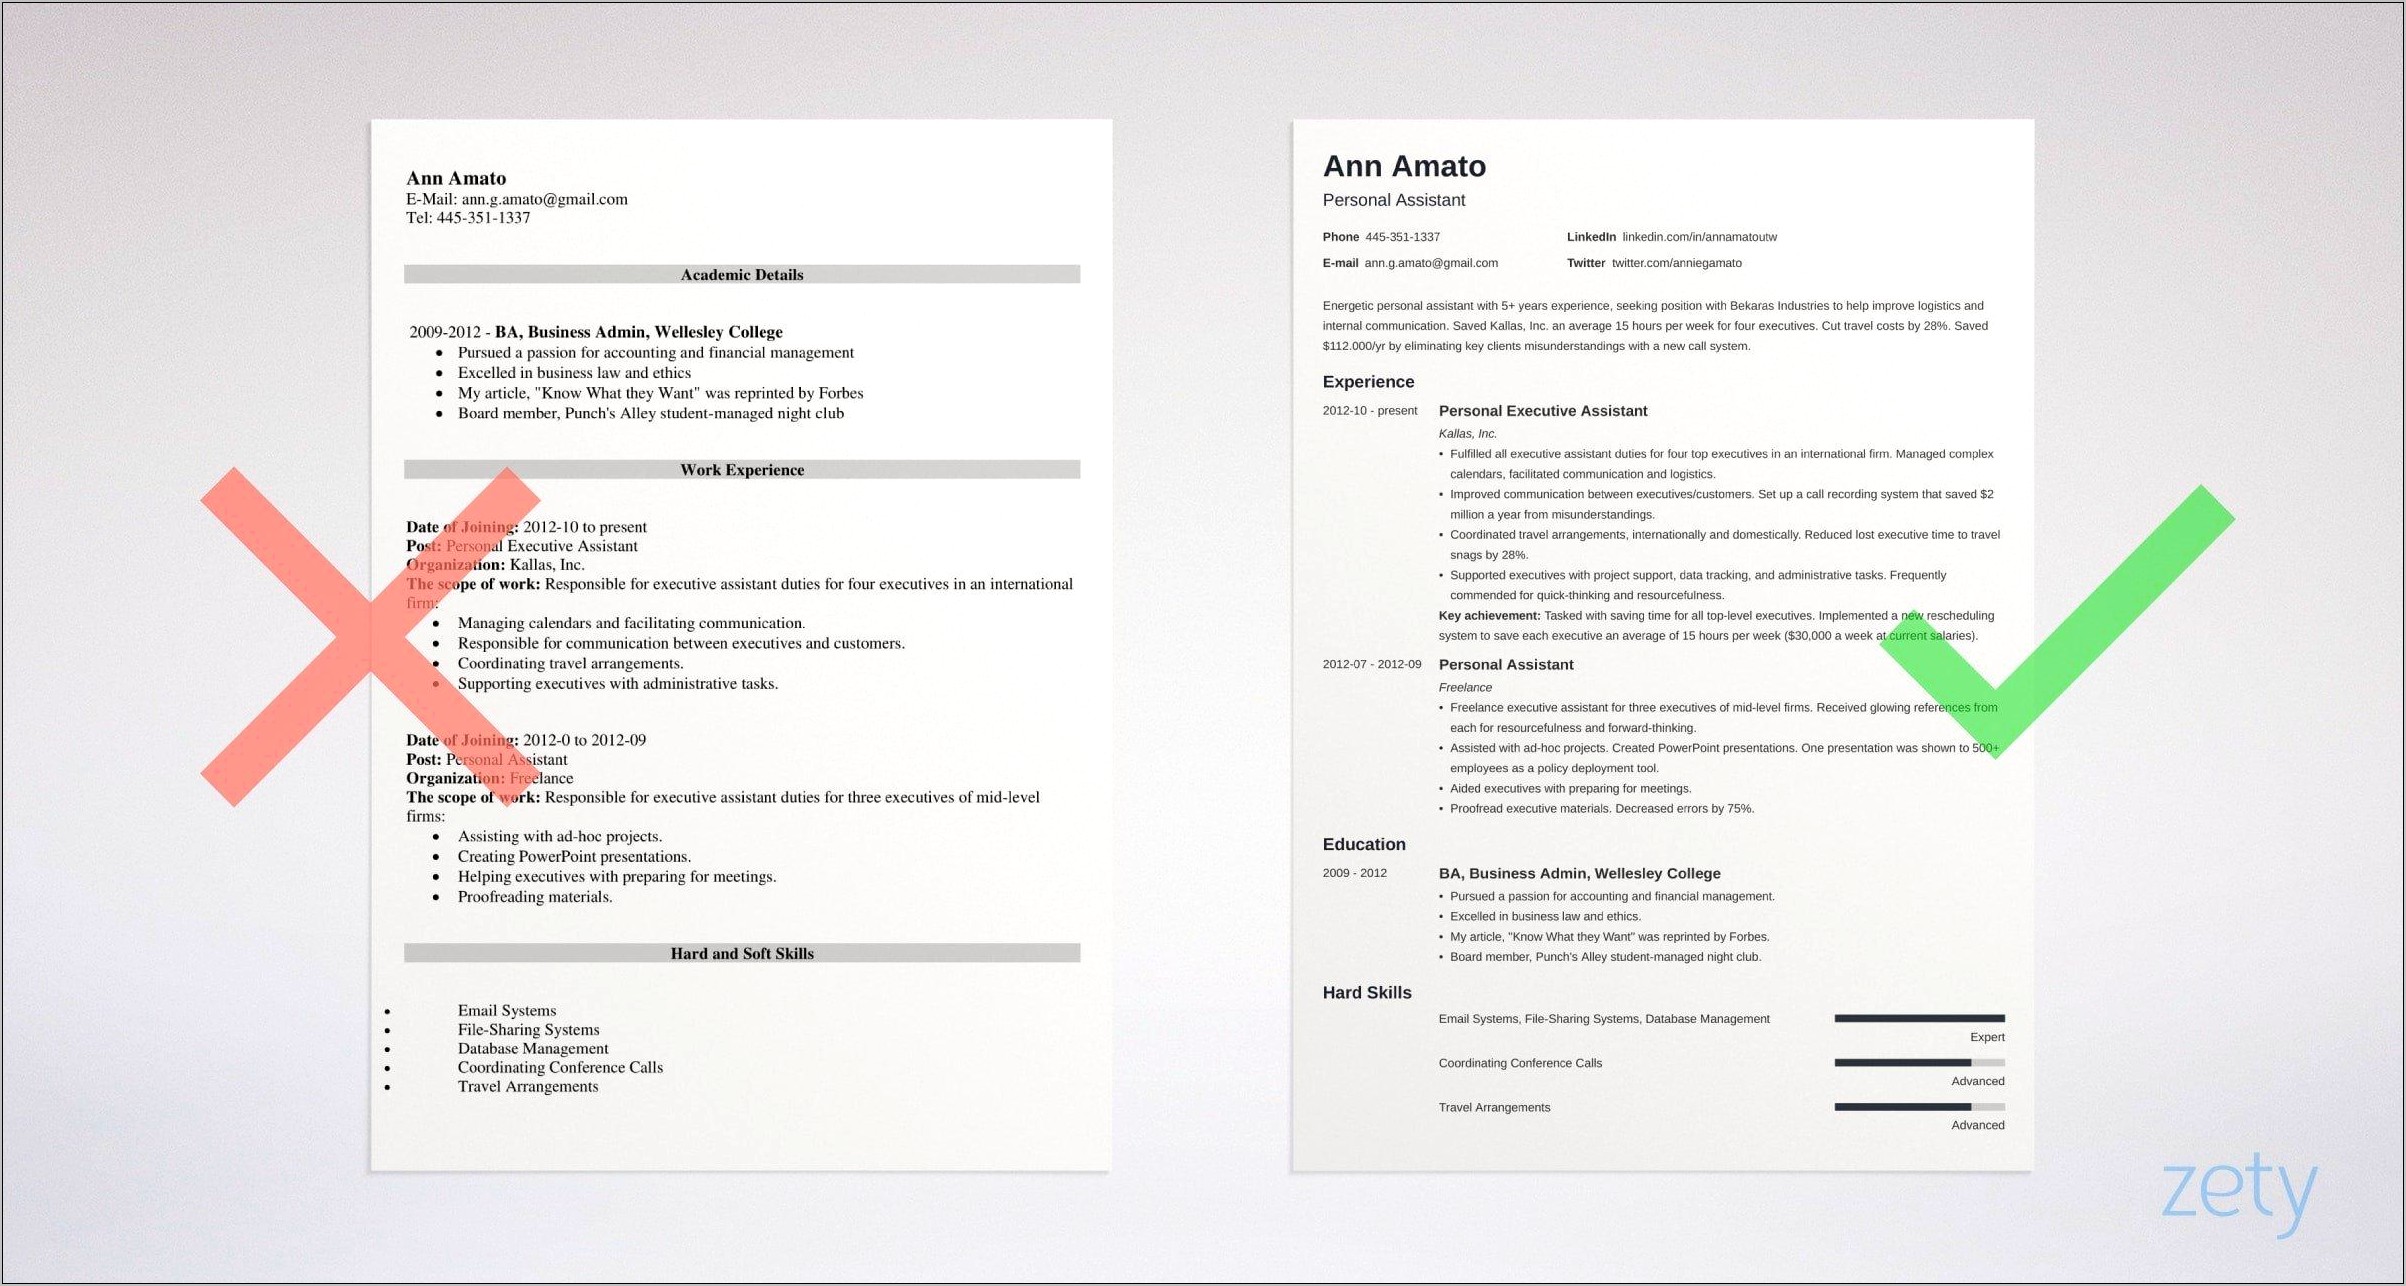 Resume Format To Get A Job